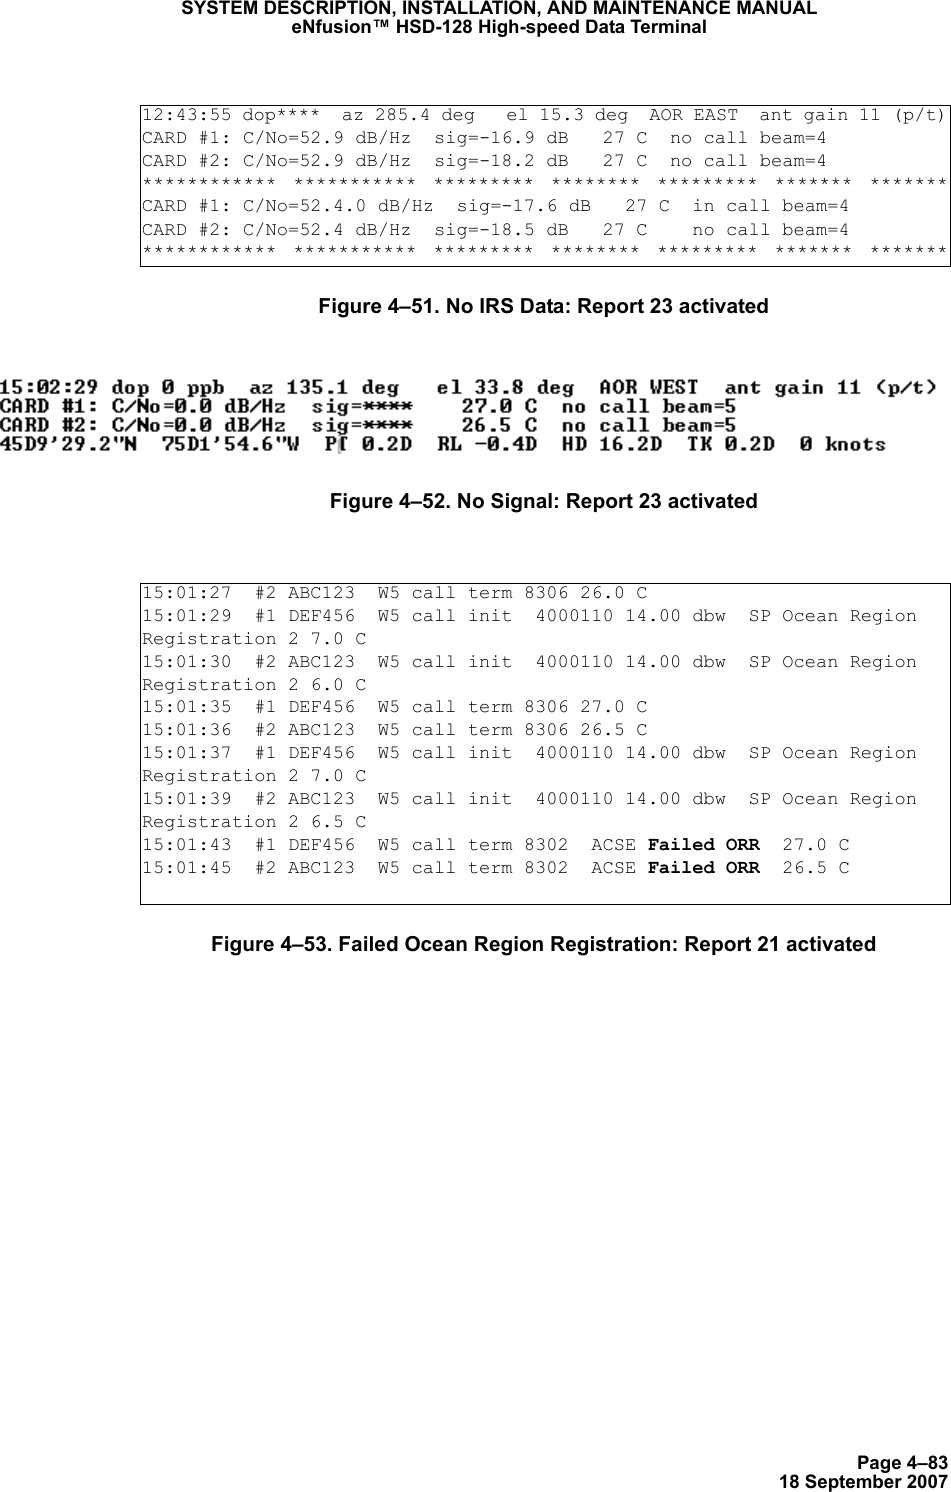 Page 4–8318 September 2007SYSTEM DESCRIPTION, INSTALLATION, AND MAINTENANCE MANUALeNfusion™ HSD-128 High-speed Data TerminalFigure 4–51. No IRS Data: Report 23 activatedFigure 4–52. No Signal: Report 23 activatedFigure 4–53. Failed Ocean Region Registration: Report 21 activated12:43:55 dop****  az 285.4 deg   el 15.3 deg  AOR EAST  ant gain 11 (p/t)CARD #1: C/No=52.9 dB/Hz  sig=-16.9 dB   27 C  no call beam=4 CARD #2: C/No=52.9 dB/Hz  sig=-18.2 dB   27 C  no call beam=4 ************  ***********  *********  ********  *********  *******  *******CARD #1: C/No=52.4.0 dB/Hz  sig=-17.6 dB   27 C  in call beam=4 CARD #2: C/No=52.4 dB/Hz  sig=-18.5 dB   27 C    no call beam=4 ************  ***********  *********  ********  *********  *******  *******15:01:27  #2 ABC123  W5 call term 8306 26.0 C15:01:29  #1 DEF456  W5 call init  4000110 14.00 dbw  SP Ocean Region Registration 2 7.0 C15:01:30  #2 ABC123  W5 call init  4000110 14.00 dbw  SP Ocean Region Registration 2 6.0 C15:01:35  #1 DEF456  W5 call term 8306 27.0 C15:01:36  #2 ABC123  W5 call term 8306 26.5 C15:01:37  #1 DEF456  W5 call init  4000110 14.00 dbw  SP Ocean Region Registration 2 7.0 C15:01:39  #2 ABC123  W5 call init  4000110 14.00 dbw  SP Ocean Region Registration 2 6.5 C15:01:43  #1 DEF456  W5 call term 8302  ACSE Failed ORR  27.0 C15:01:45  #2 ABC123  W5 call term 8302  ACSE Failed ORR  26.5 C